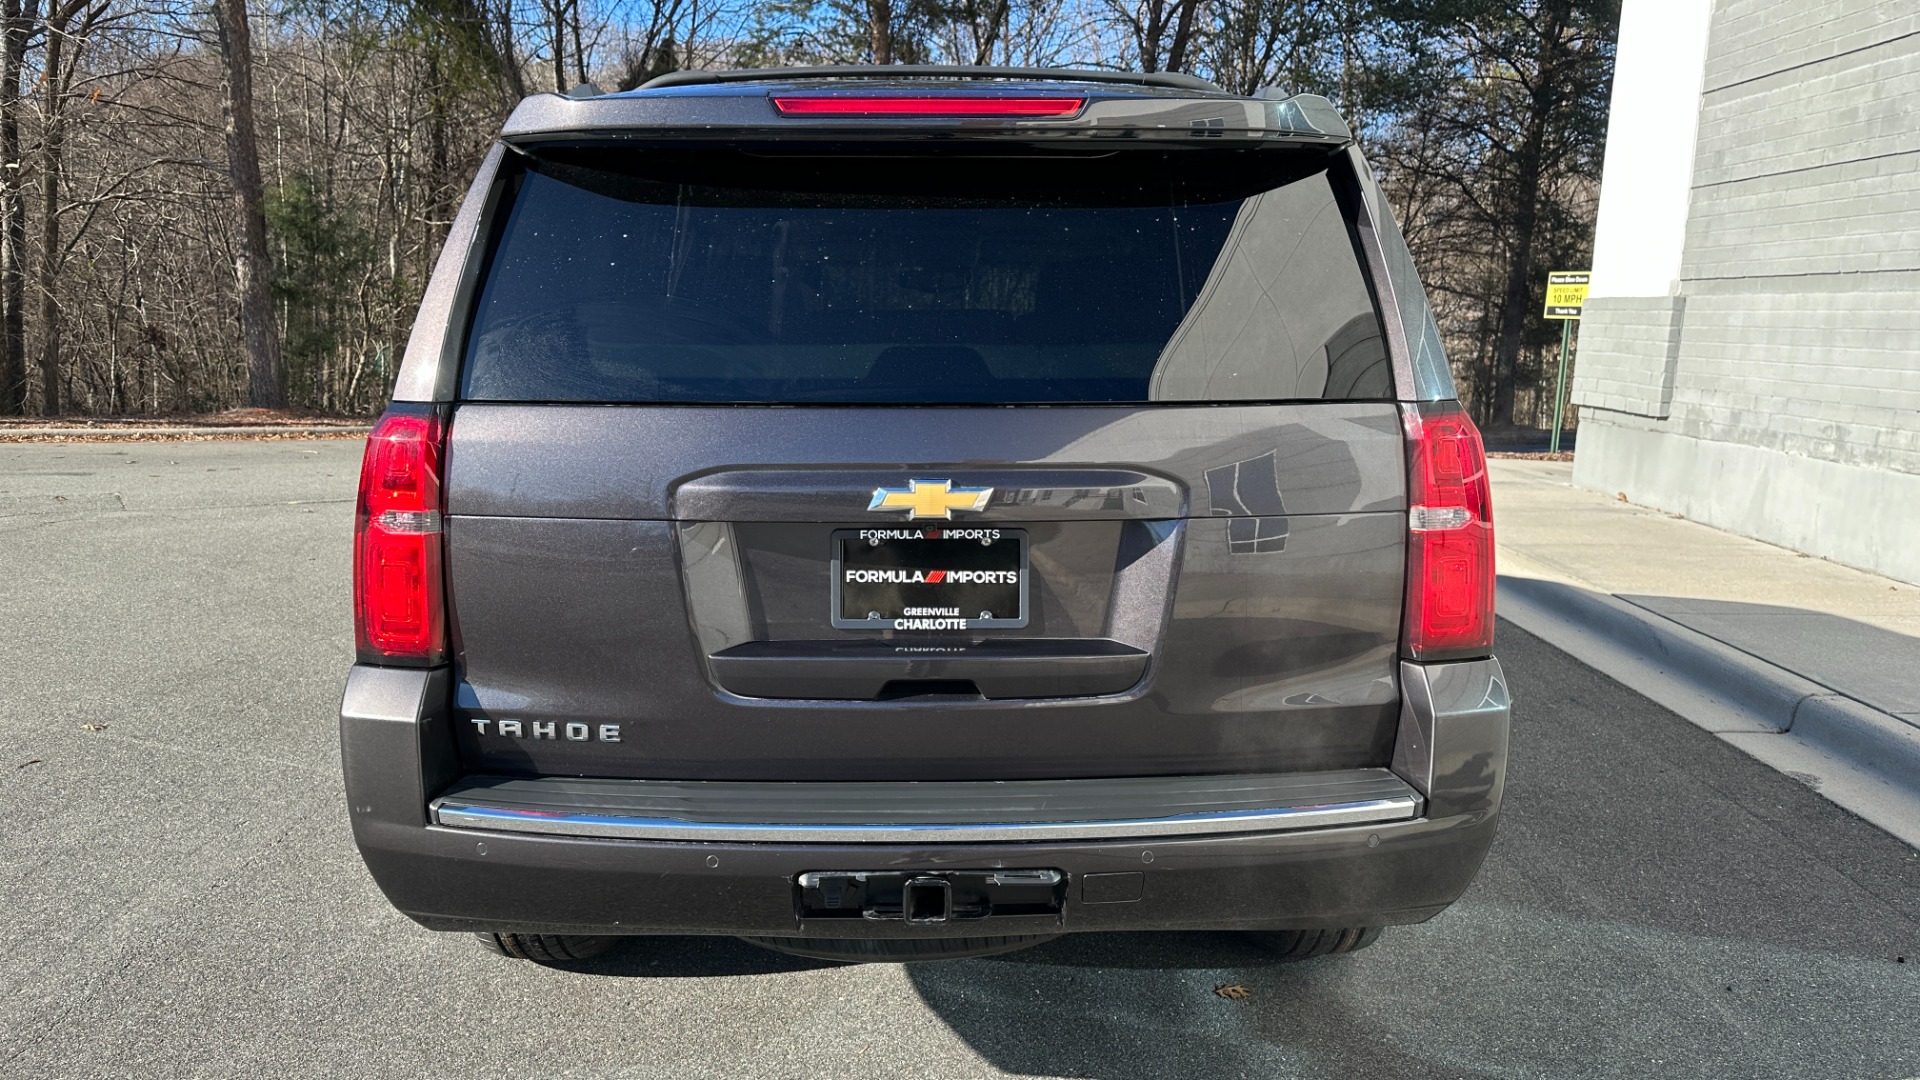 Used 2016 Chevrolet Tahoe LTZ / NAVIGATION / LEATHER / 4WD / 22IN WHEELS / REAR ENTERTAINMENT for sale $38,500 at Formula Imports in Charlotte NC 28227 8